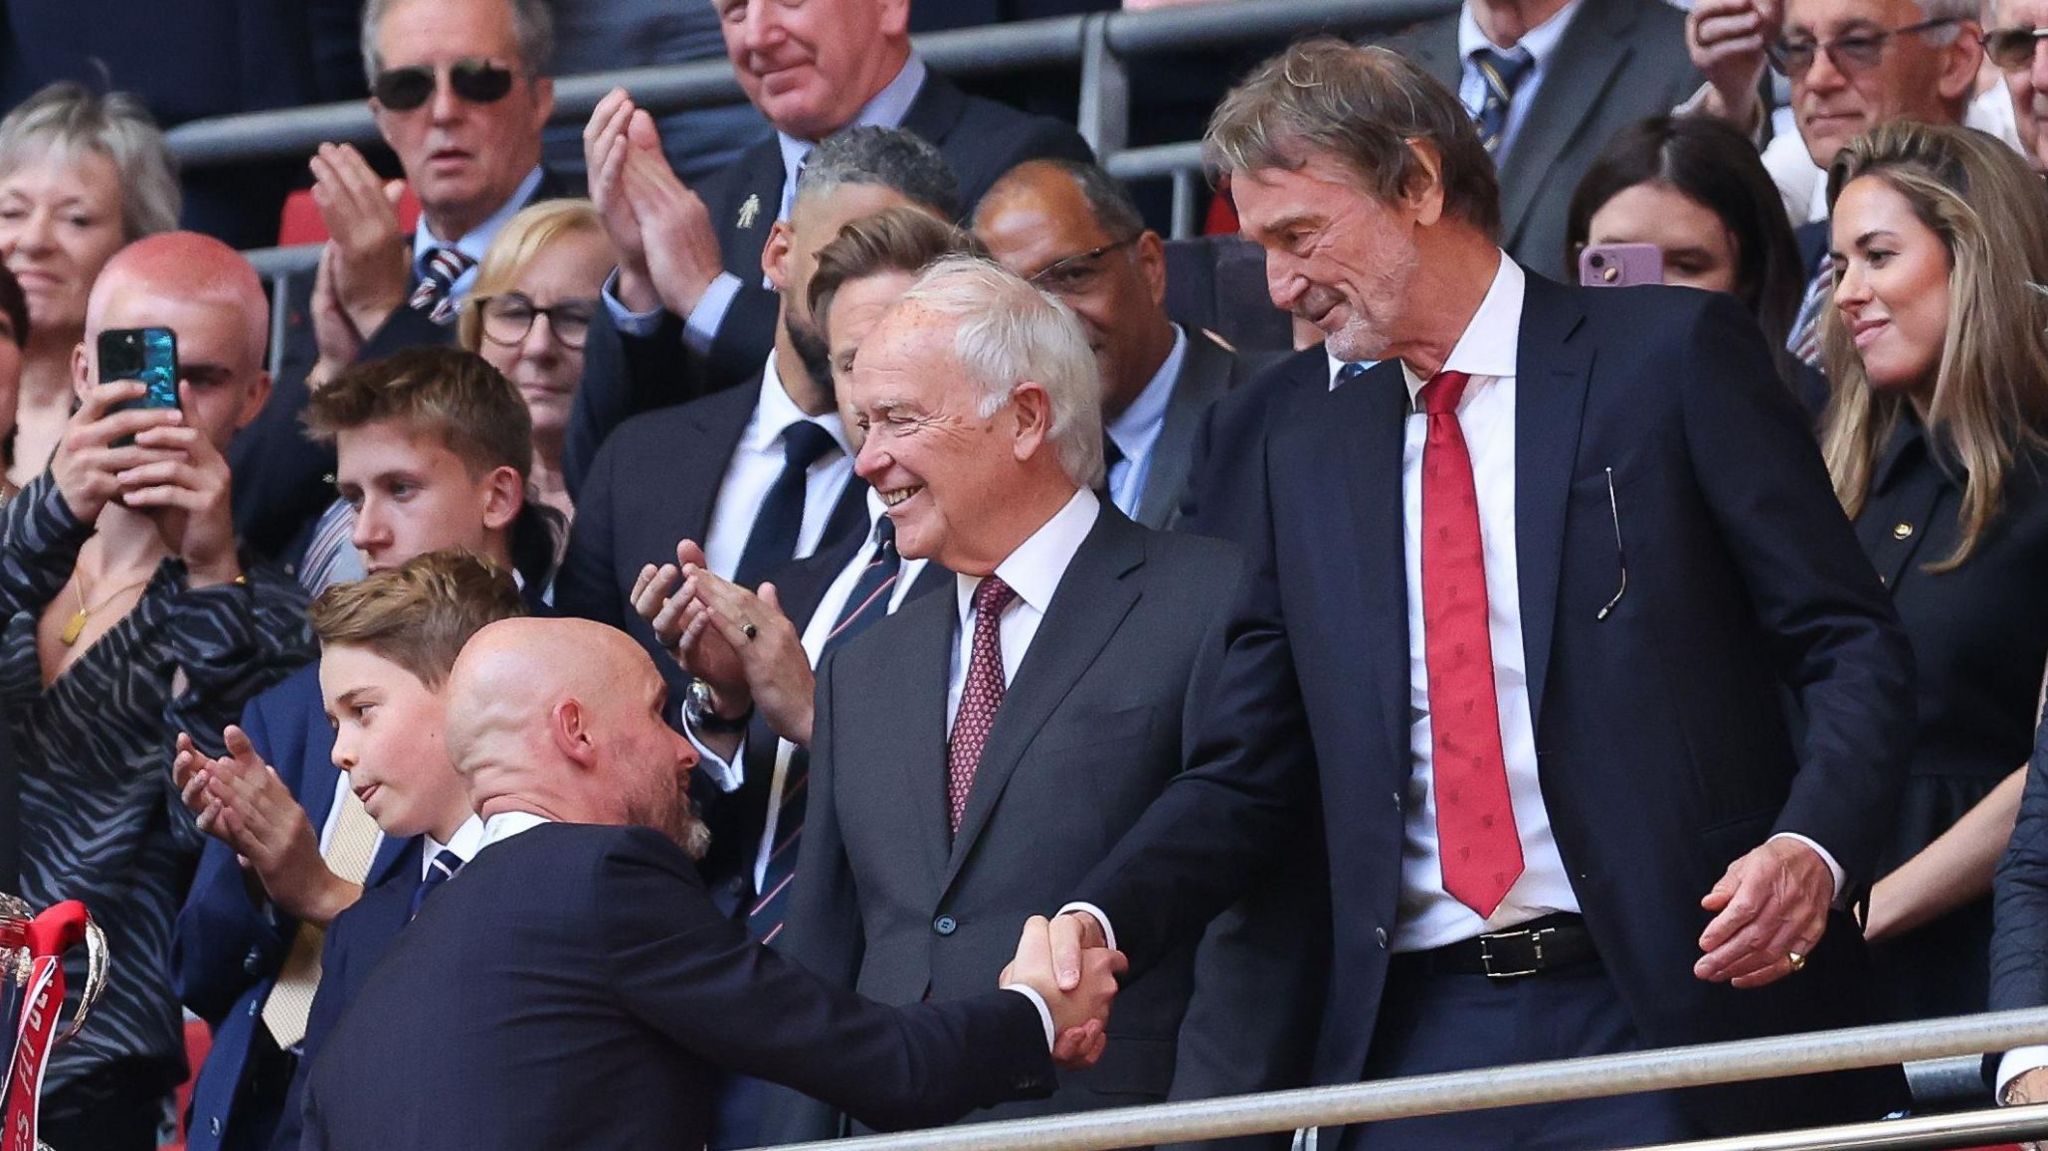 Manchester United manager Erik ten Hag shakes hands with minority owner Sir Jim Ratcliffe after the club's FA Cup win against Manchester City